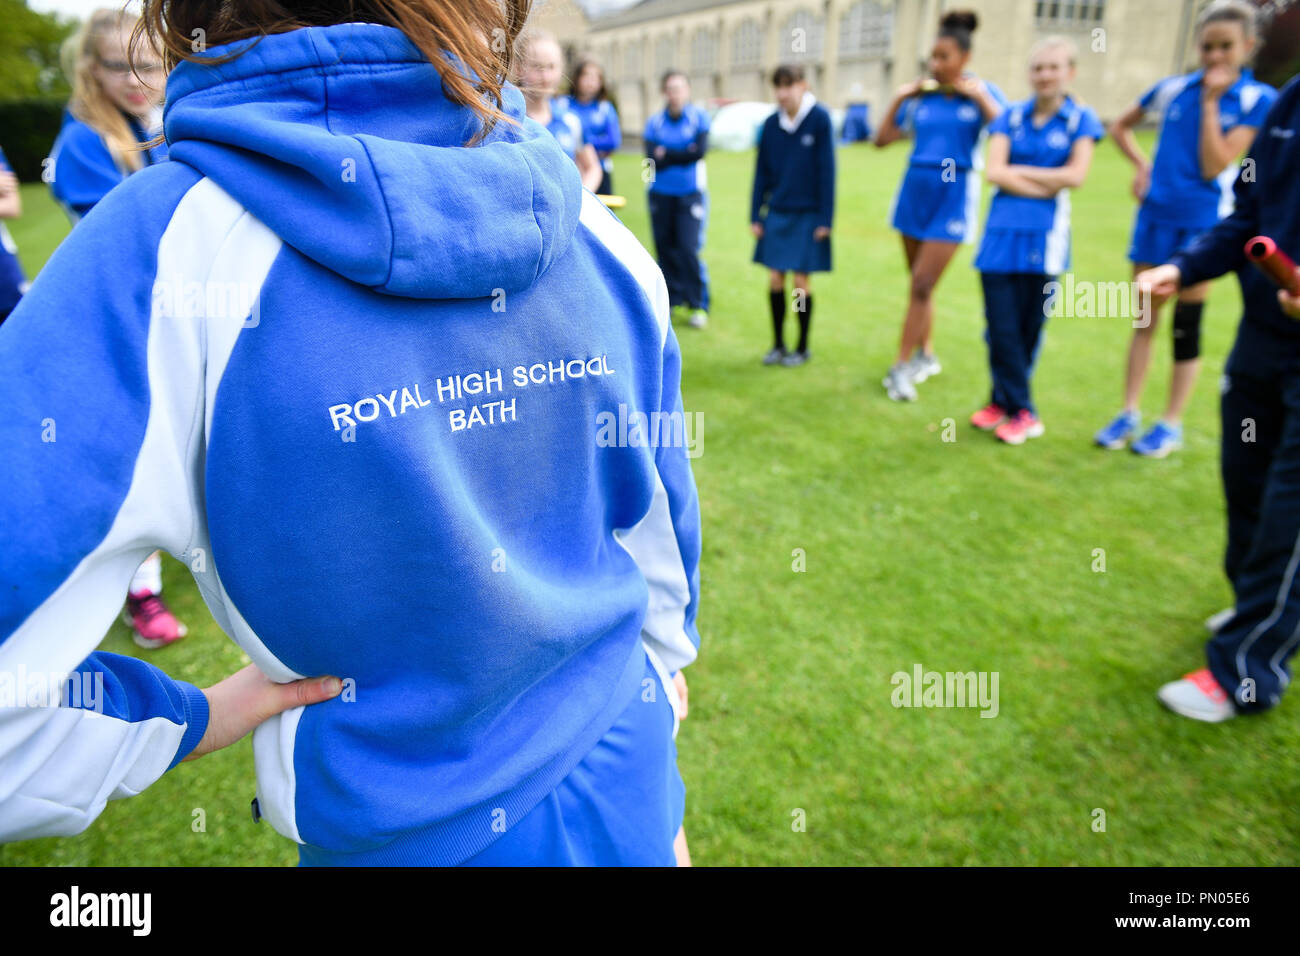 Students during a Physical Education (PE) lesson on the school playing field at Royal High School Bath, which is a day and boarding school for girls aged 3-18 and also part of The Girls' Day School Trust, the leading network of independent girls' schools in the UK. Stock Photo